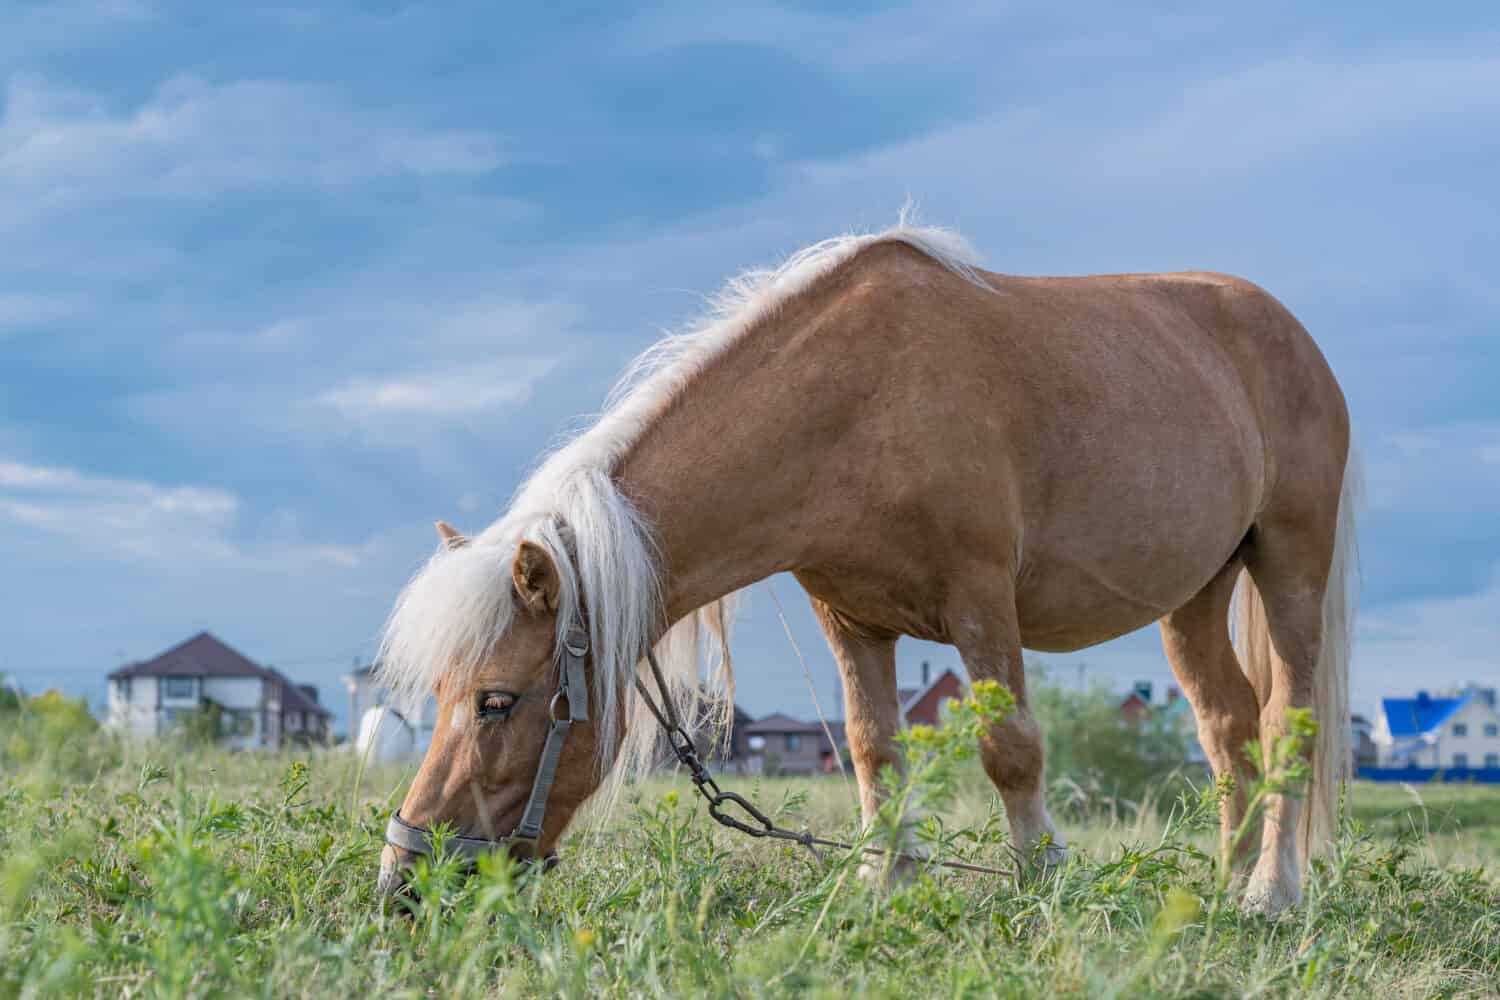 A young pony horse of Cream locus suit grazes peacefully on a green field against a blue summer sky.